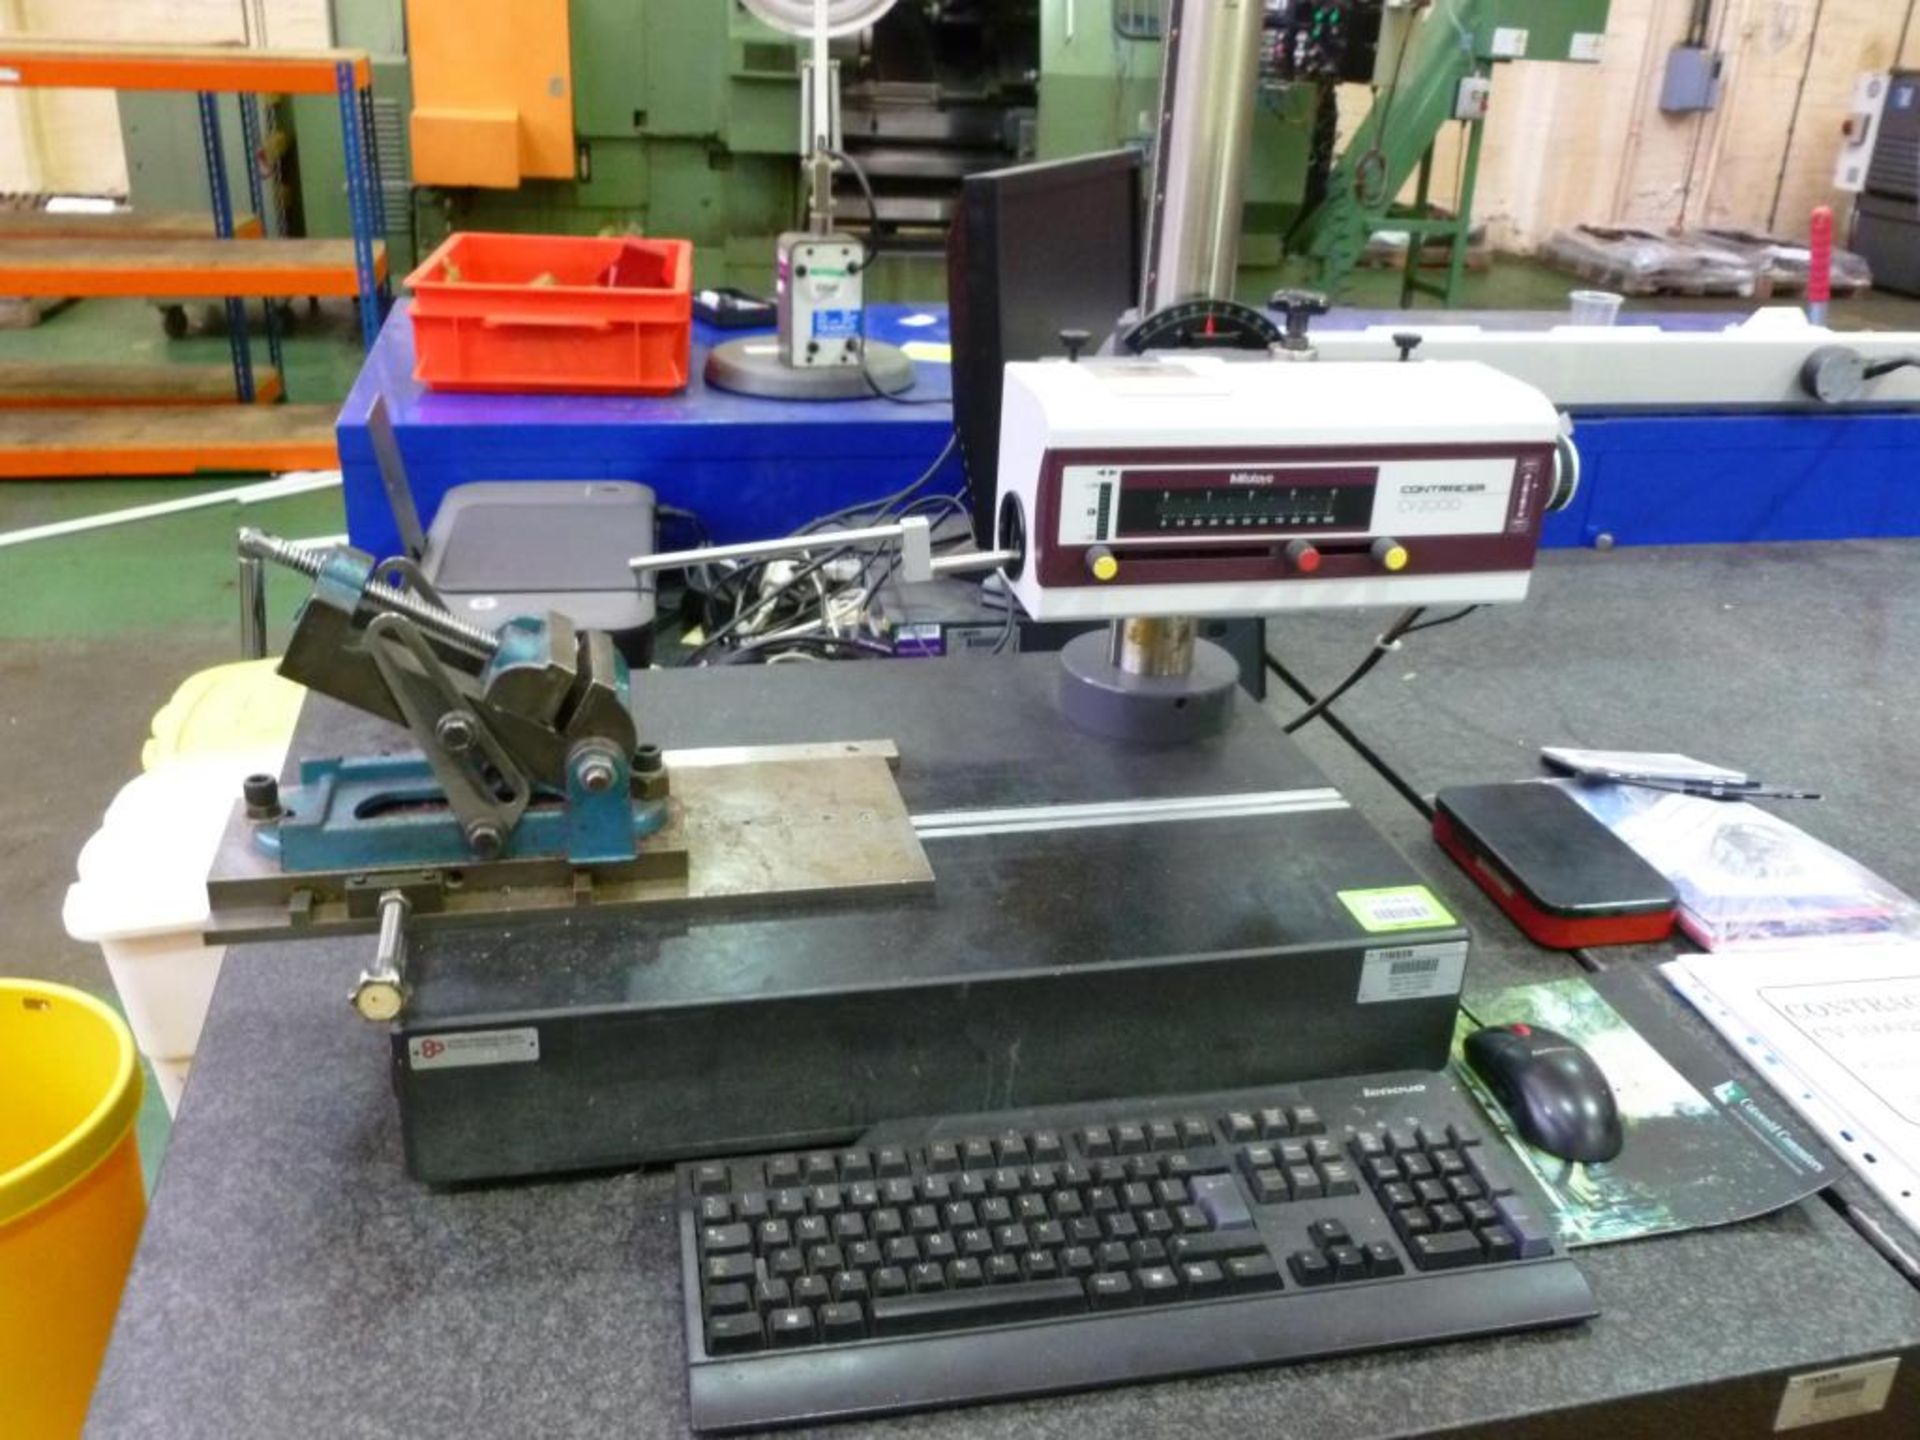 Mitutoyo Contracer CV-2000 Surface Contour Measuring System with Sine Vice & PC. HIT# 2135443. Asset - Image 2 of 2